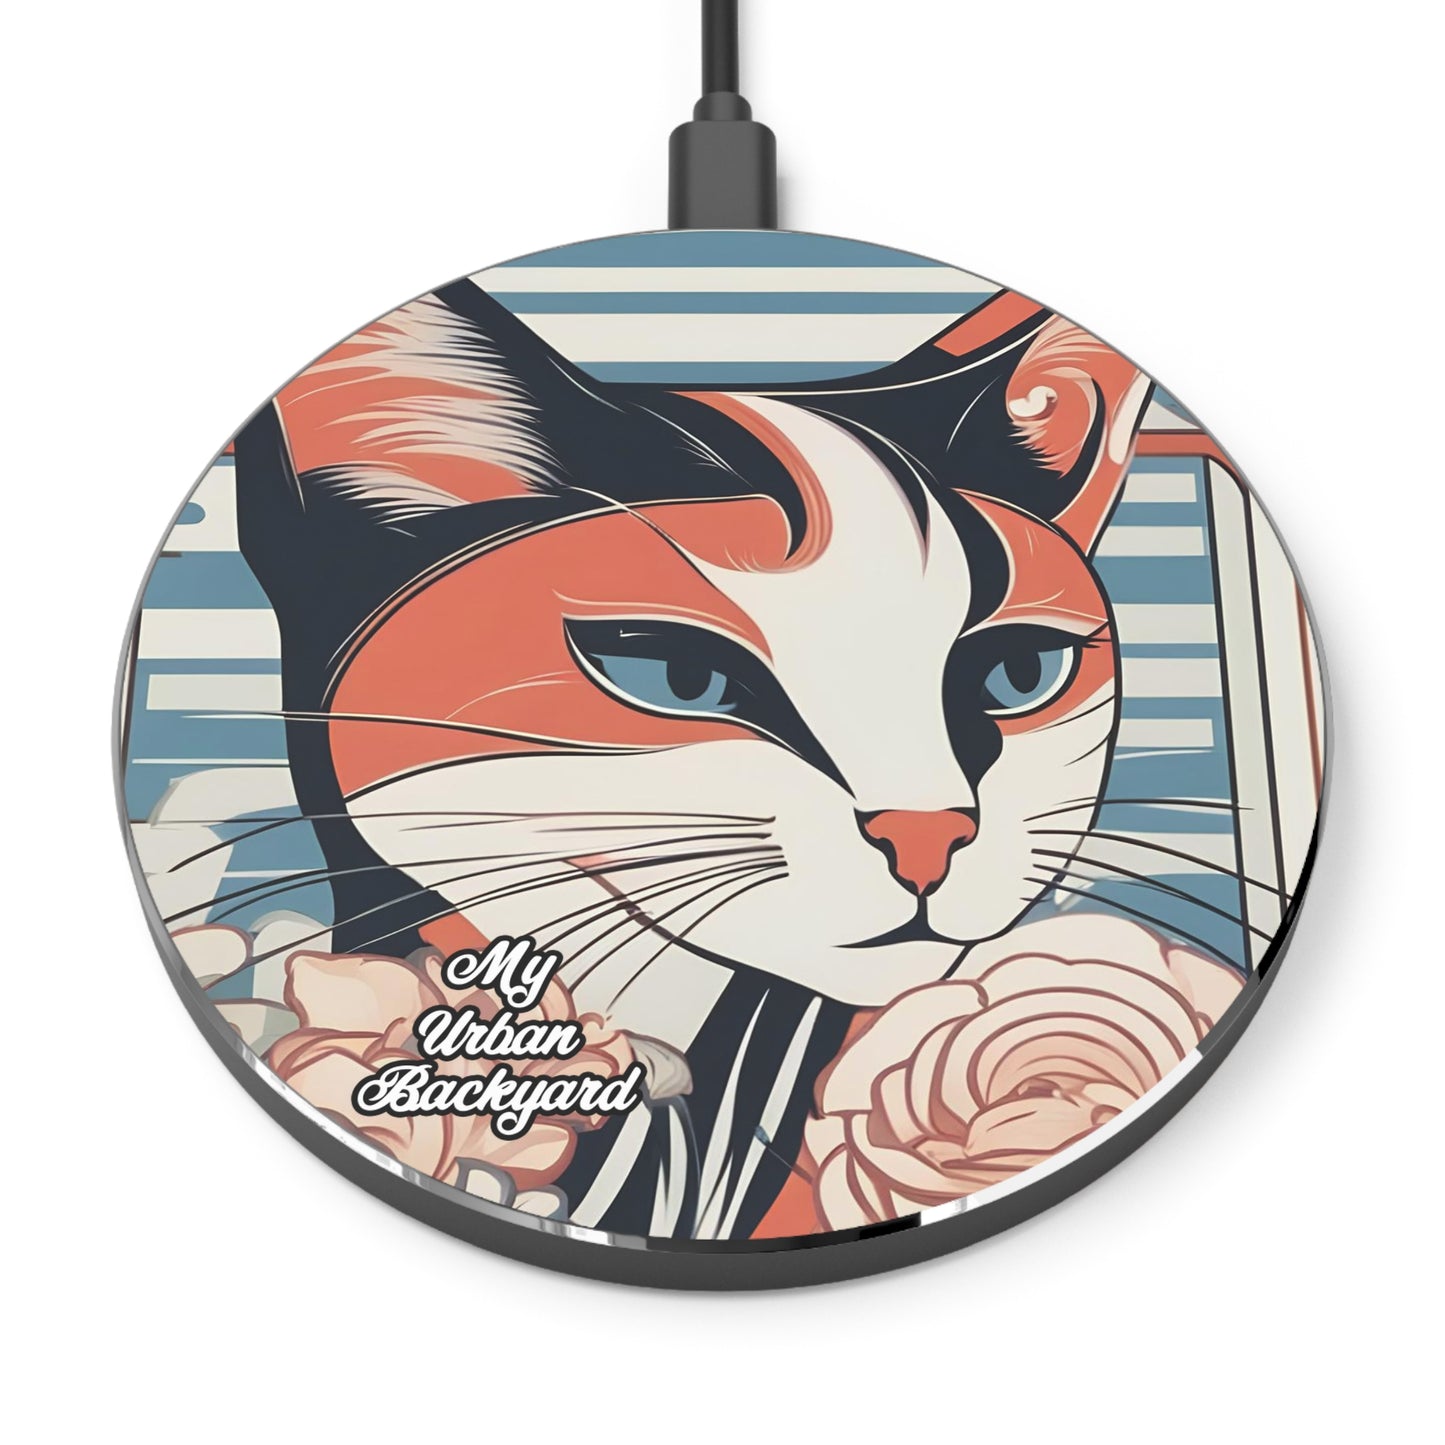 Art Deco Cat, 10W Wireless Charger for iPhone, Android, Earbuds